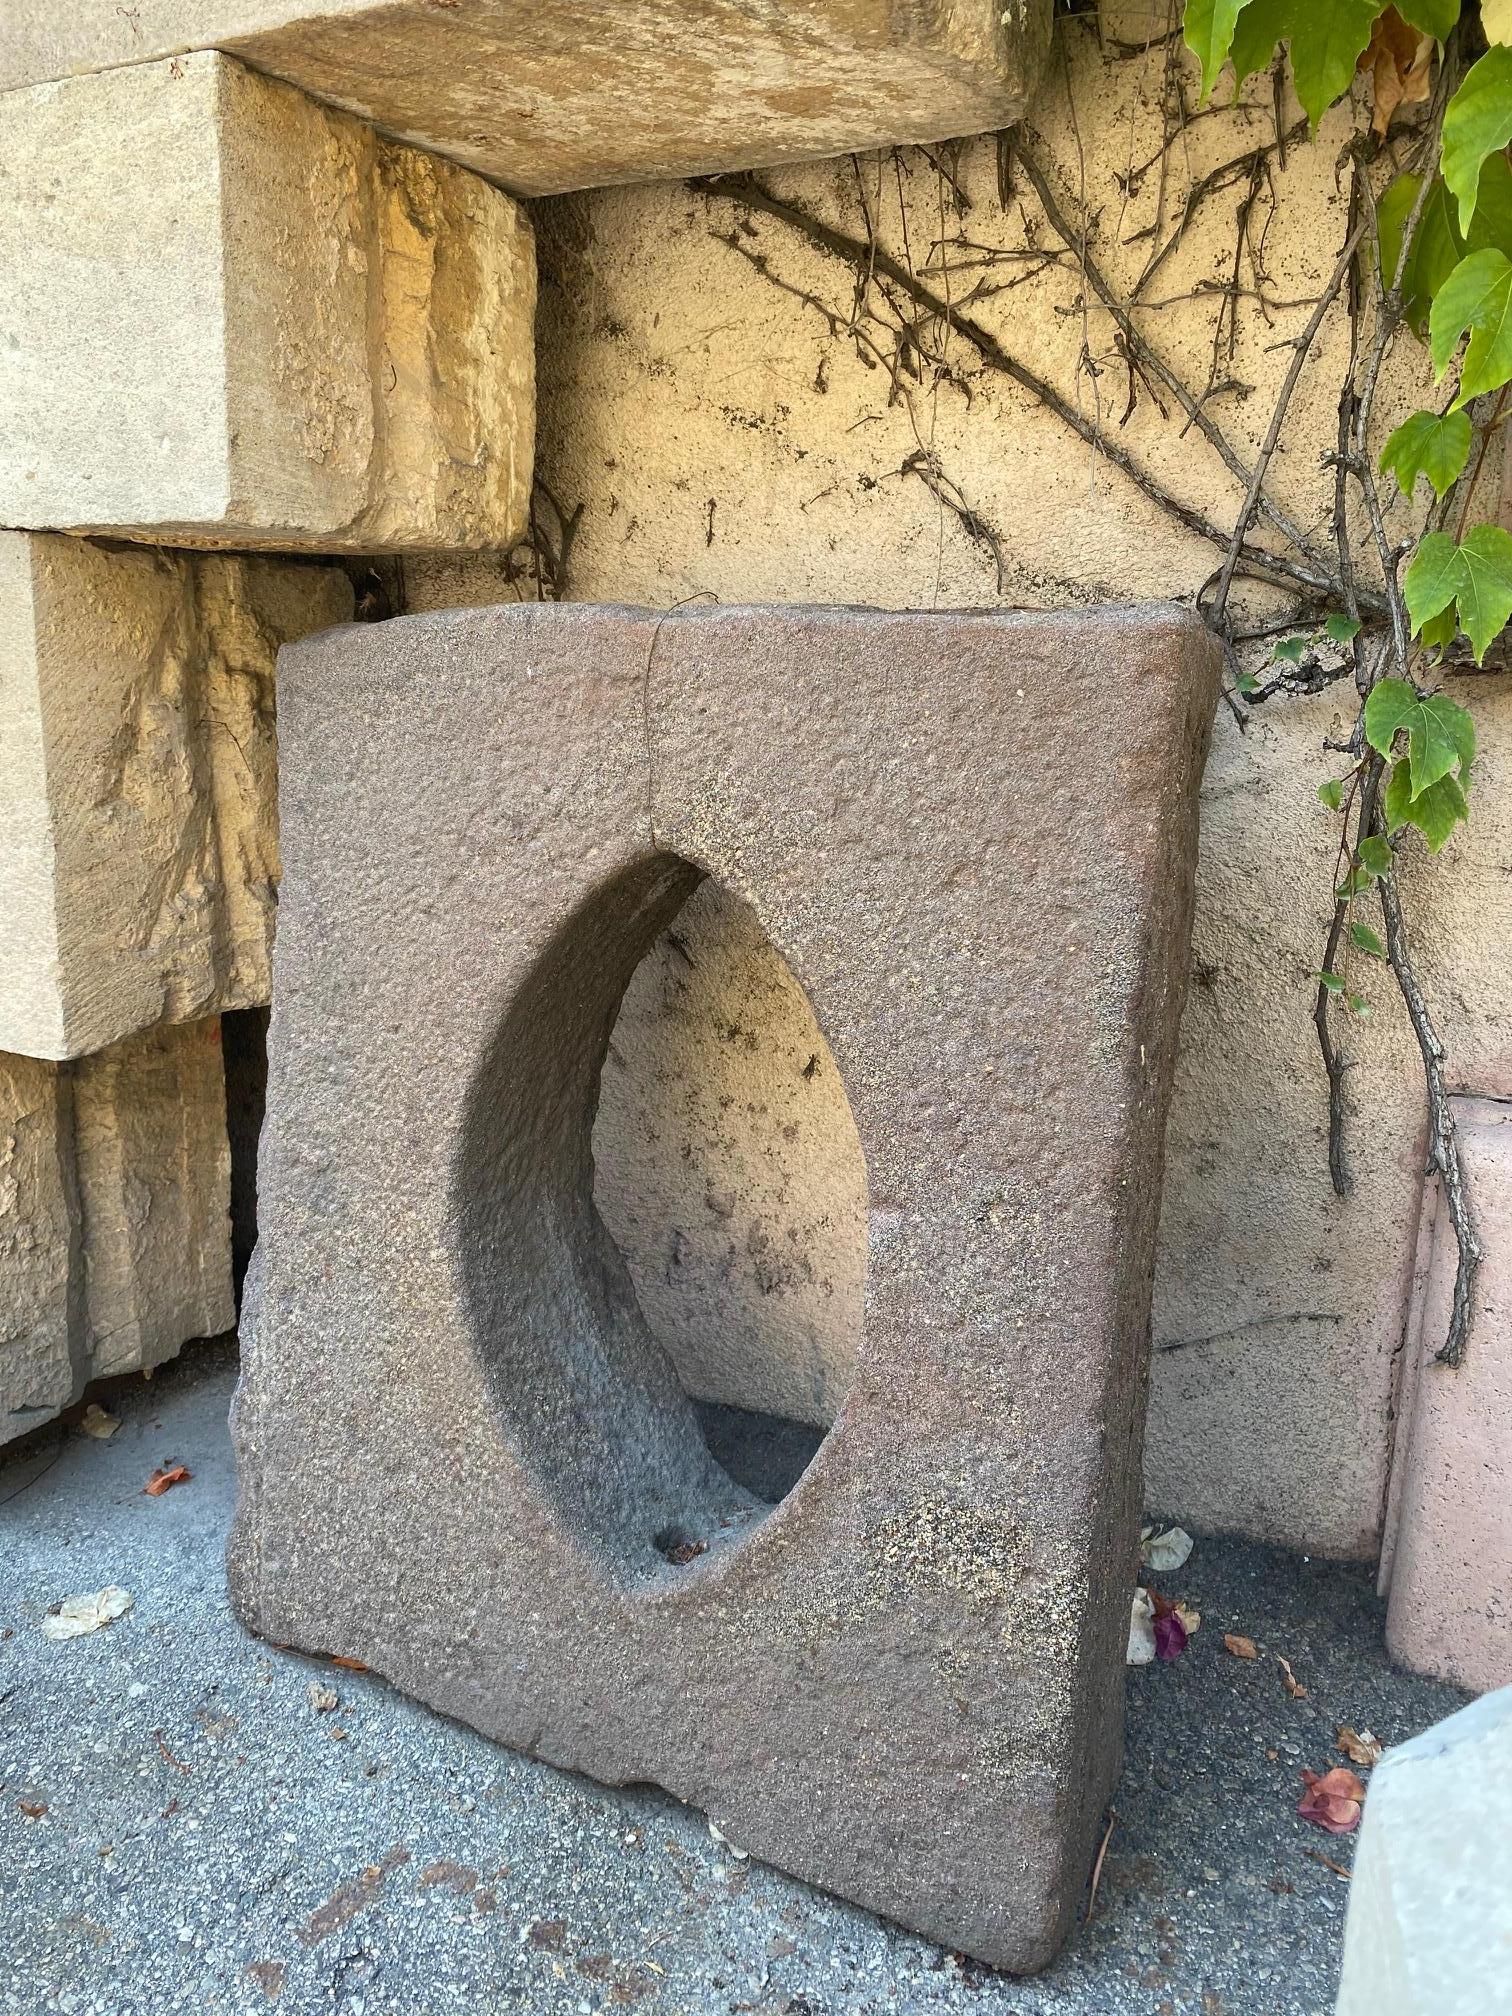 A beautiful late 18th-19th century carved stone window surround architectural element. It could be mounted on a garden wall with a nice fountain mask or spout to create a unique wall mount fountain on top of the vanity. Or installed as a surround